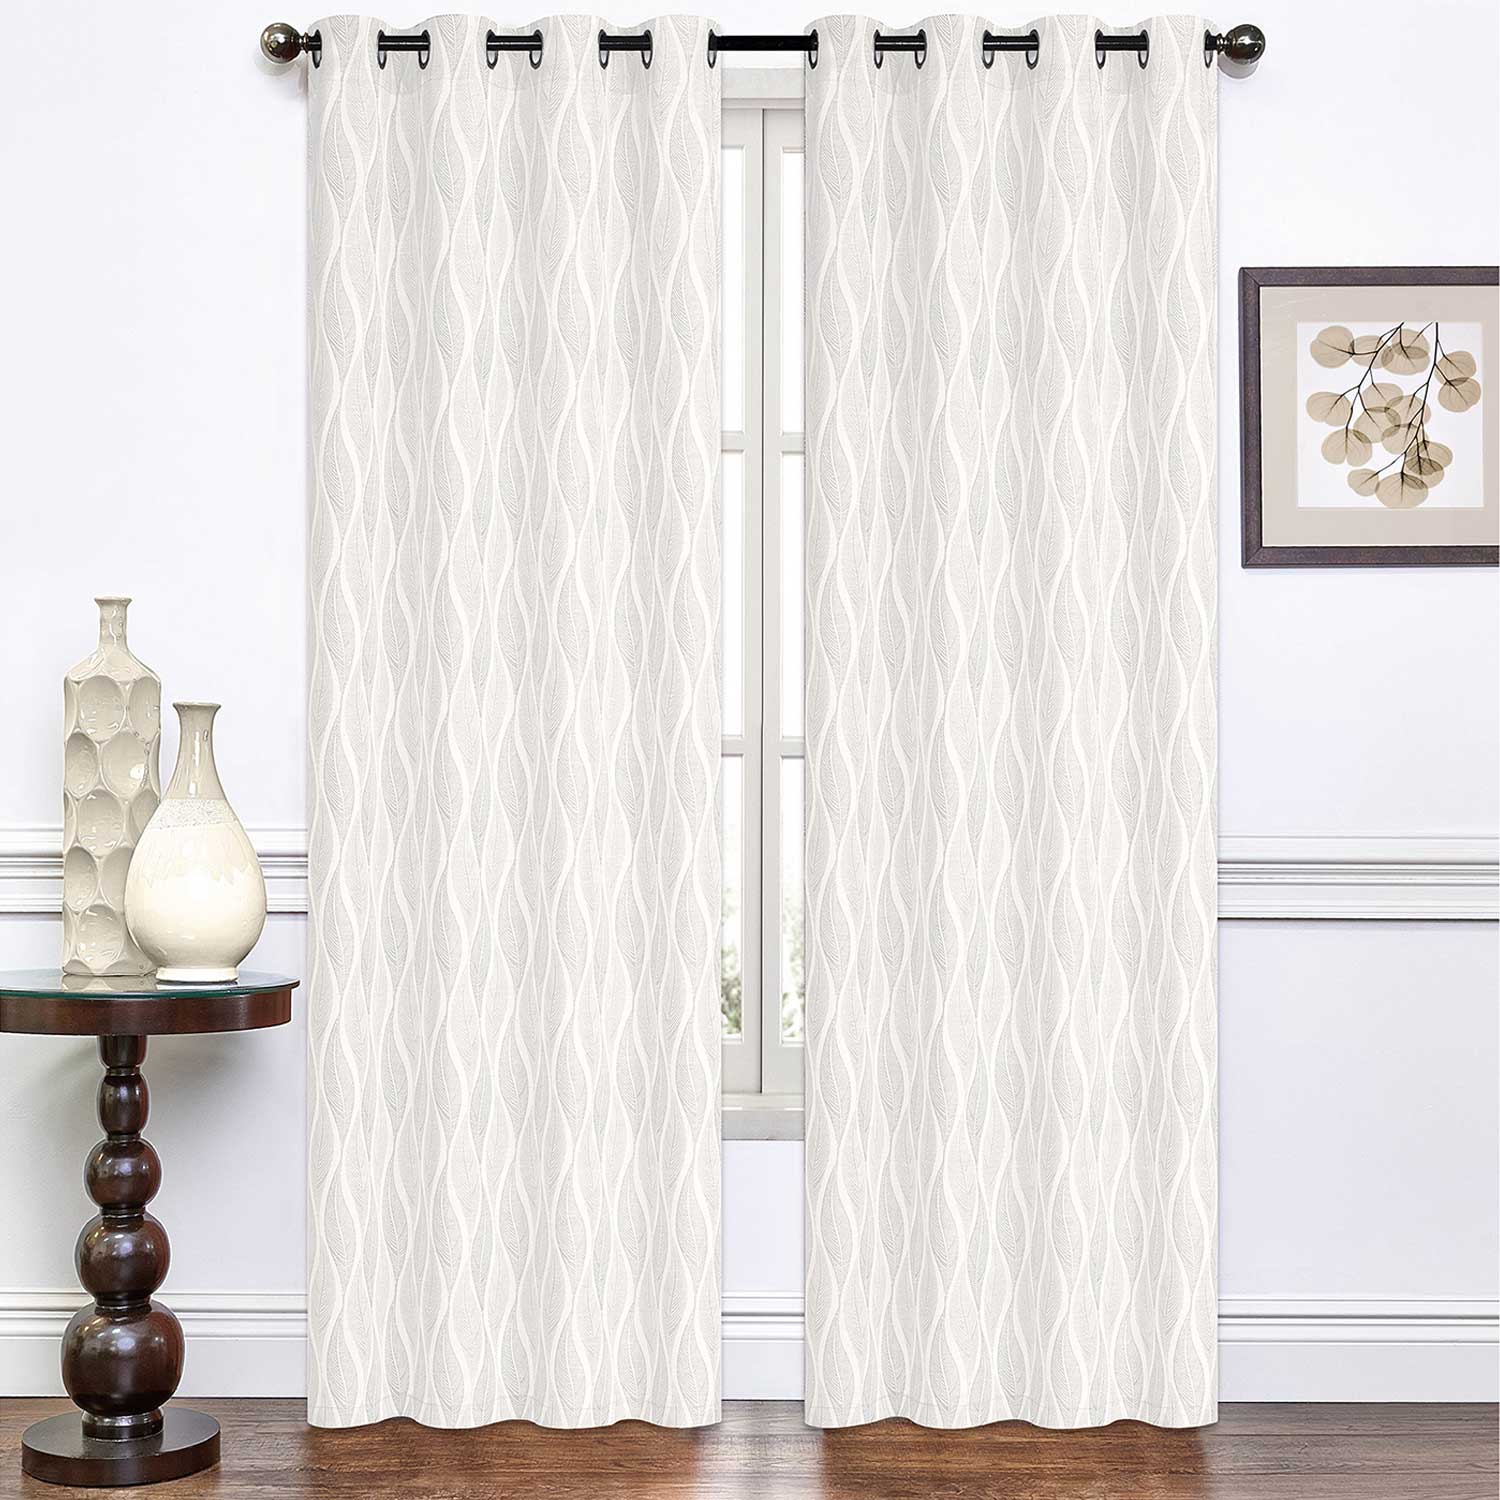 LENNOX - Wrinkle-free jacquard woven panel with metal grommets, 54"x84"